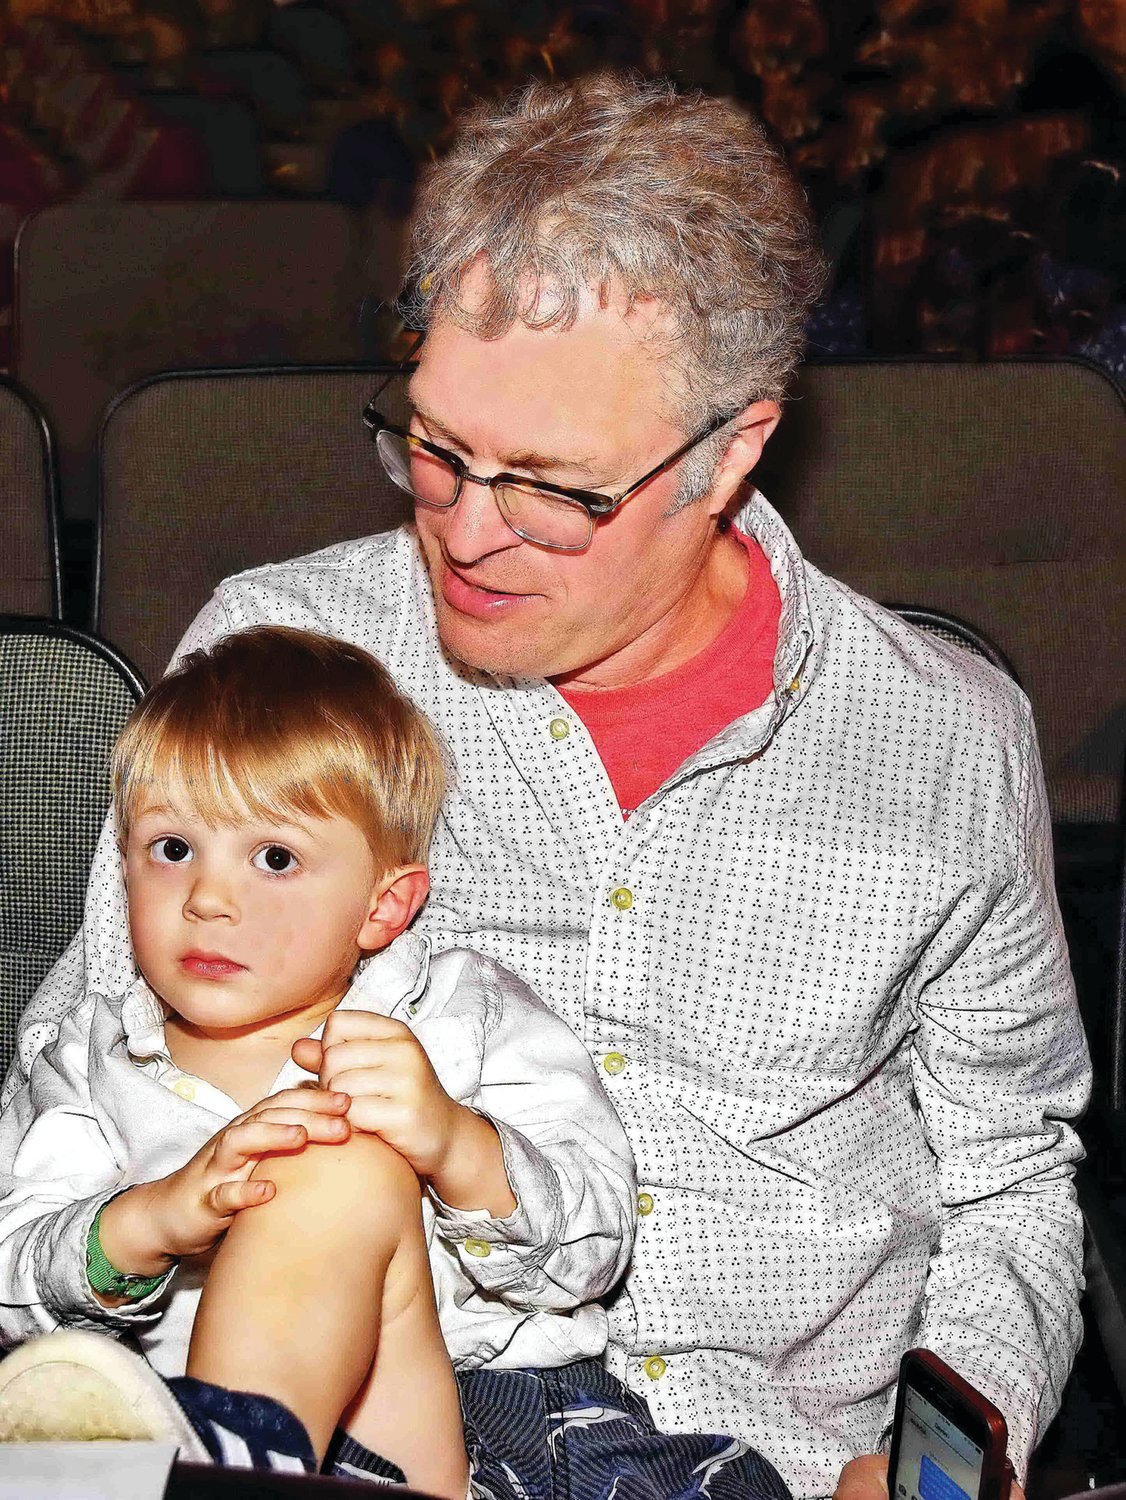 Will Hammerstein, the lyricist’s grandson, and his 2-year-old son, Oscar Hammerstein IV, take in the show. Photograph by Gordon and Libby Nieburg.